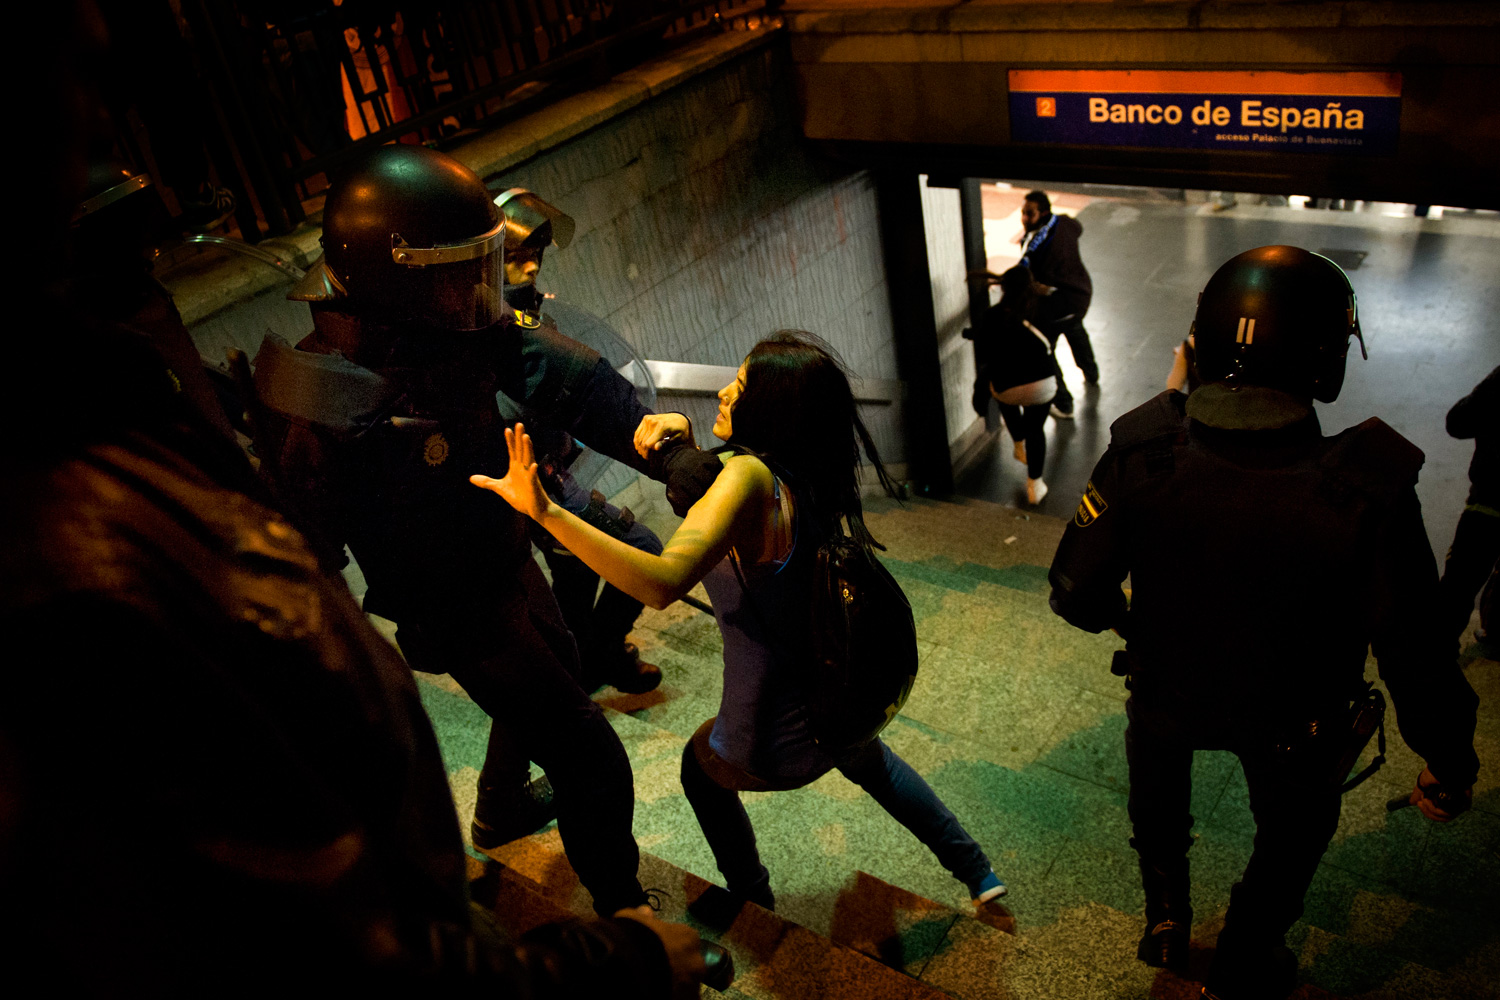 May 3, 2012. A police officer in riot gear raises his baton before hitting a girl during a celebration after Real Madrid won the Spanish Soccer La Liga, at a metro station in Madrid.